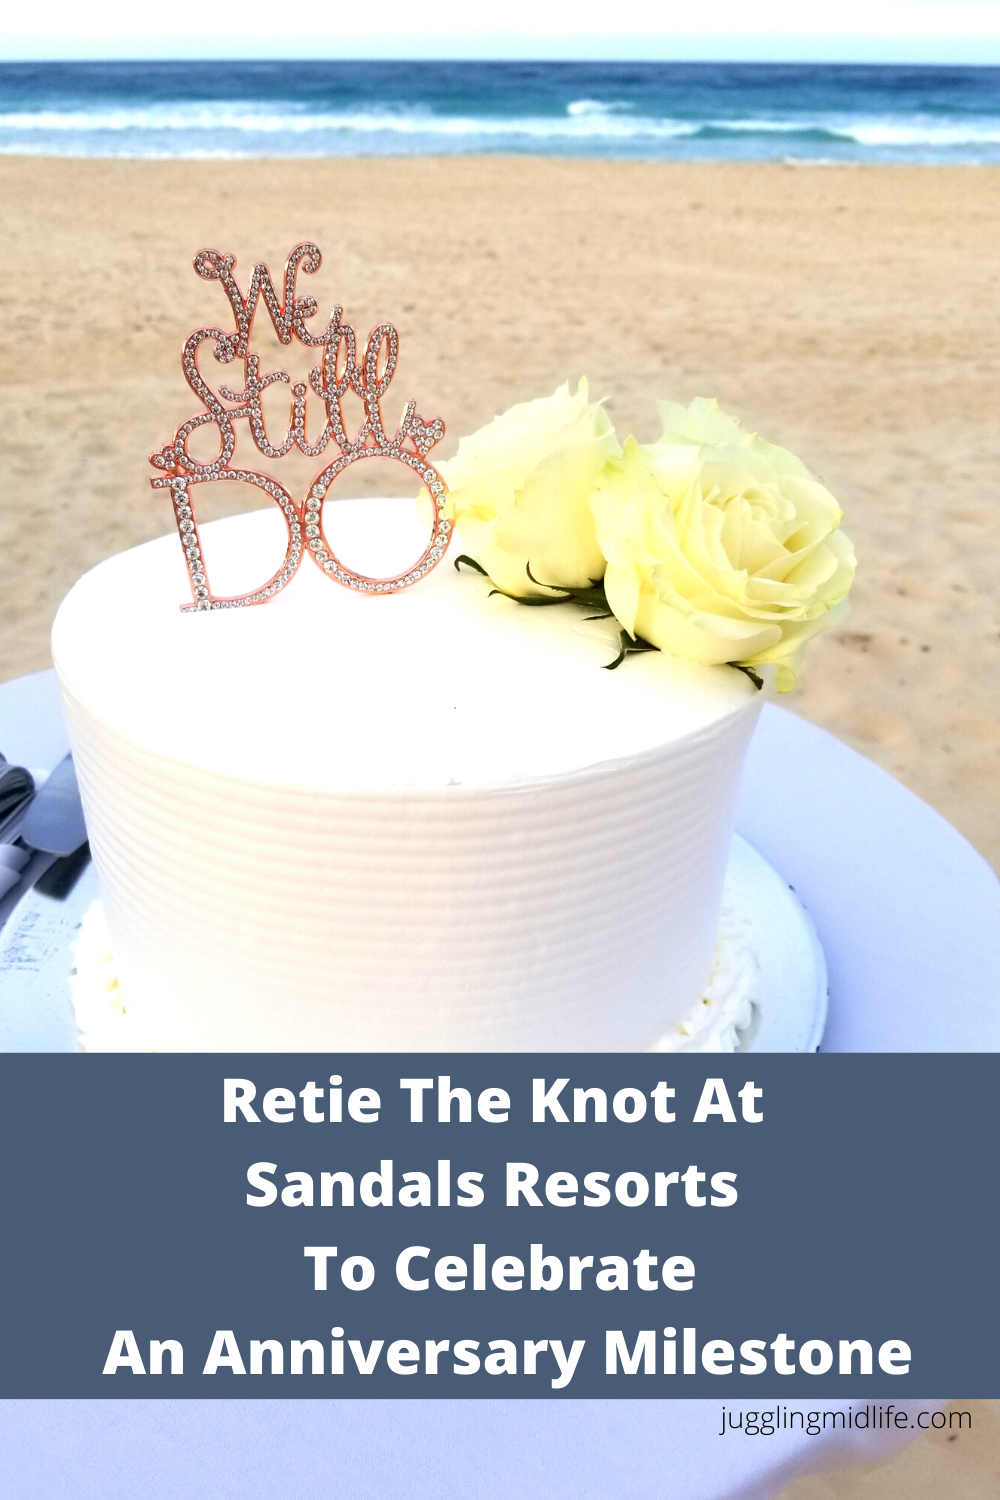 Retie the Knot at Sandals Resorts